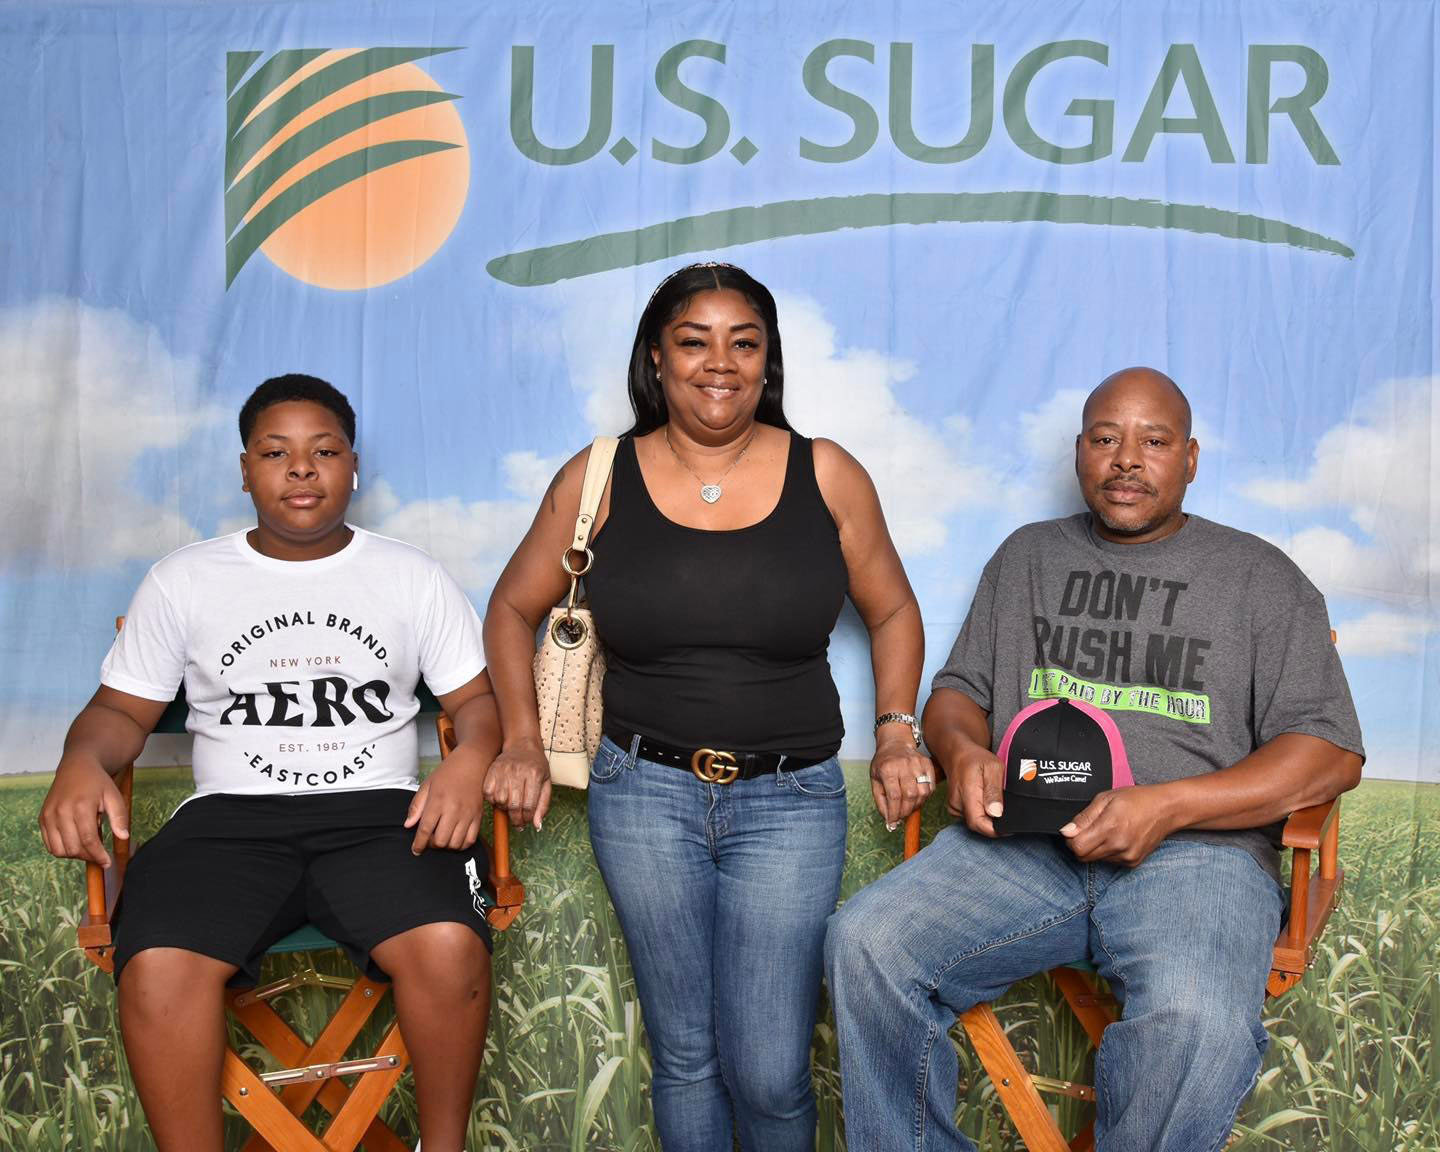 Roll Welder Phillip Ford, his wife and children recently previewed the American Sugar episode of How America Works at the Clewiston Museum.